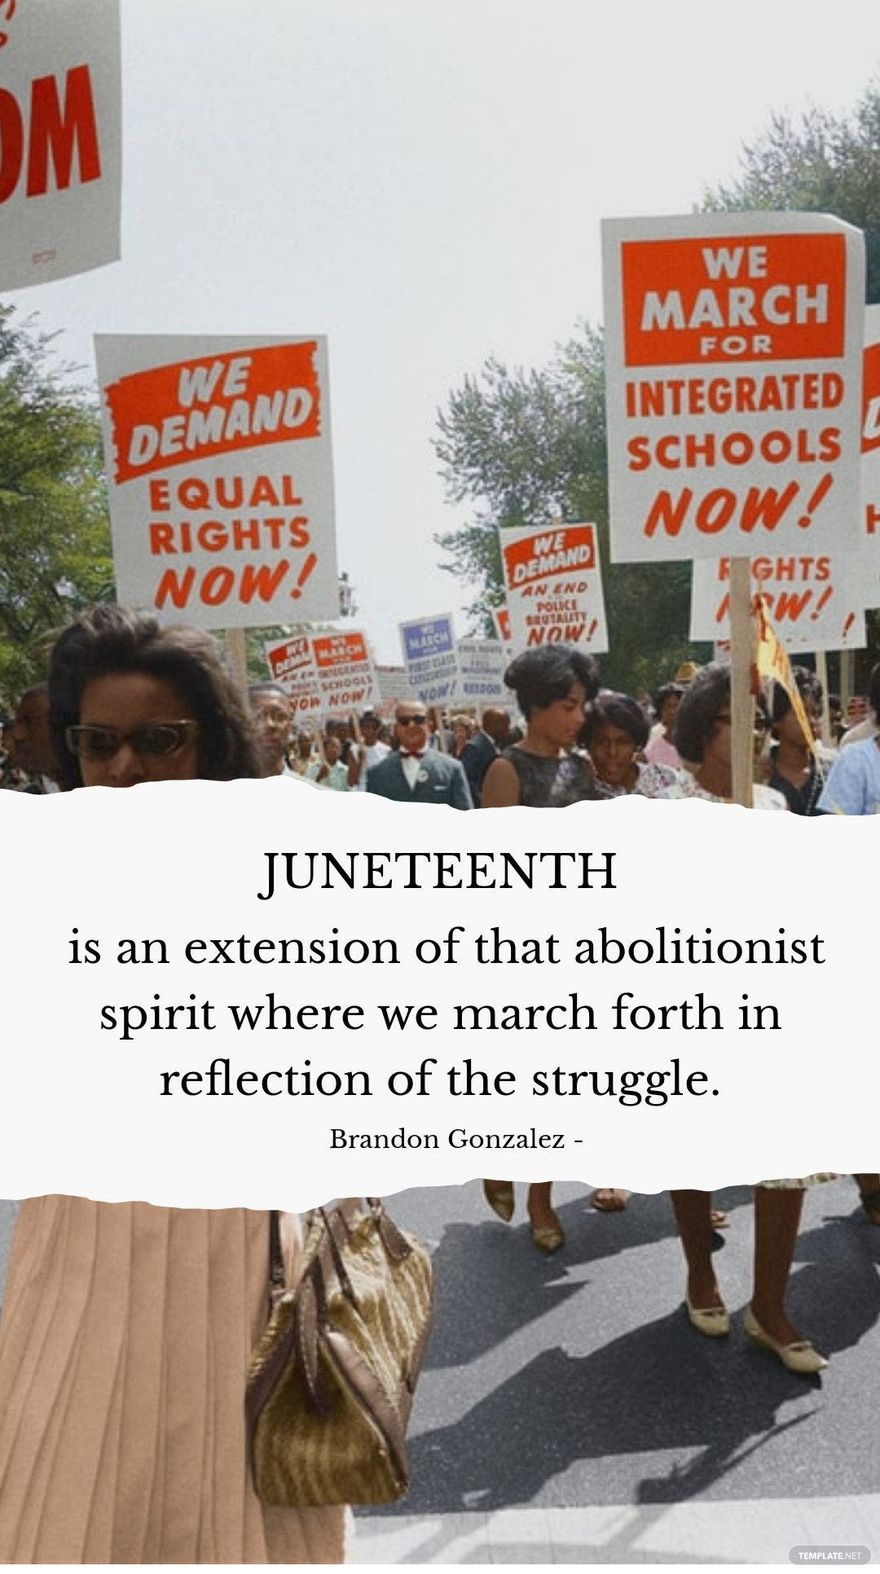 Brandon Gonzalez - Juneteenth is an extension of that abolitionist spirit where we march forth in reflection of the struggle. in JPG